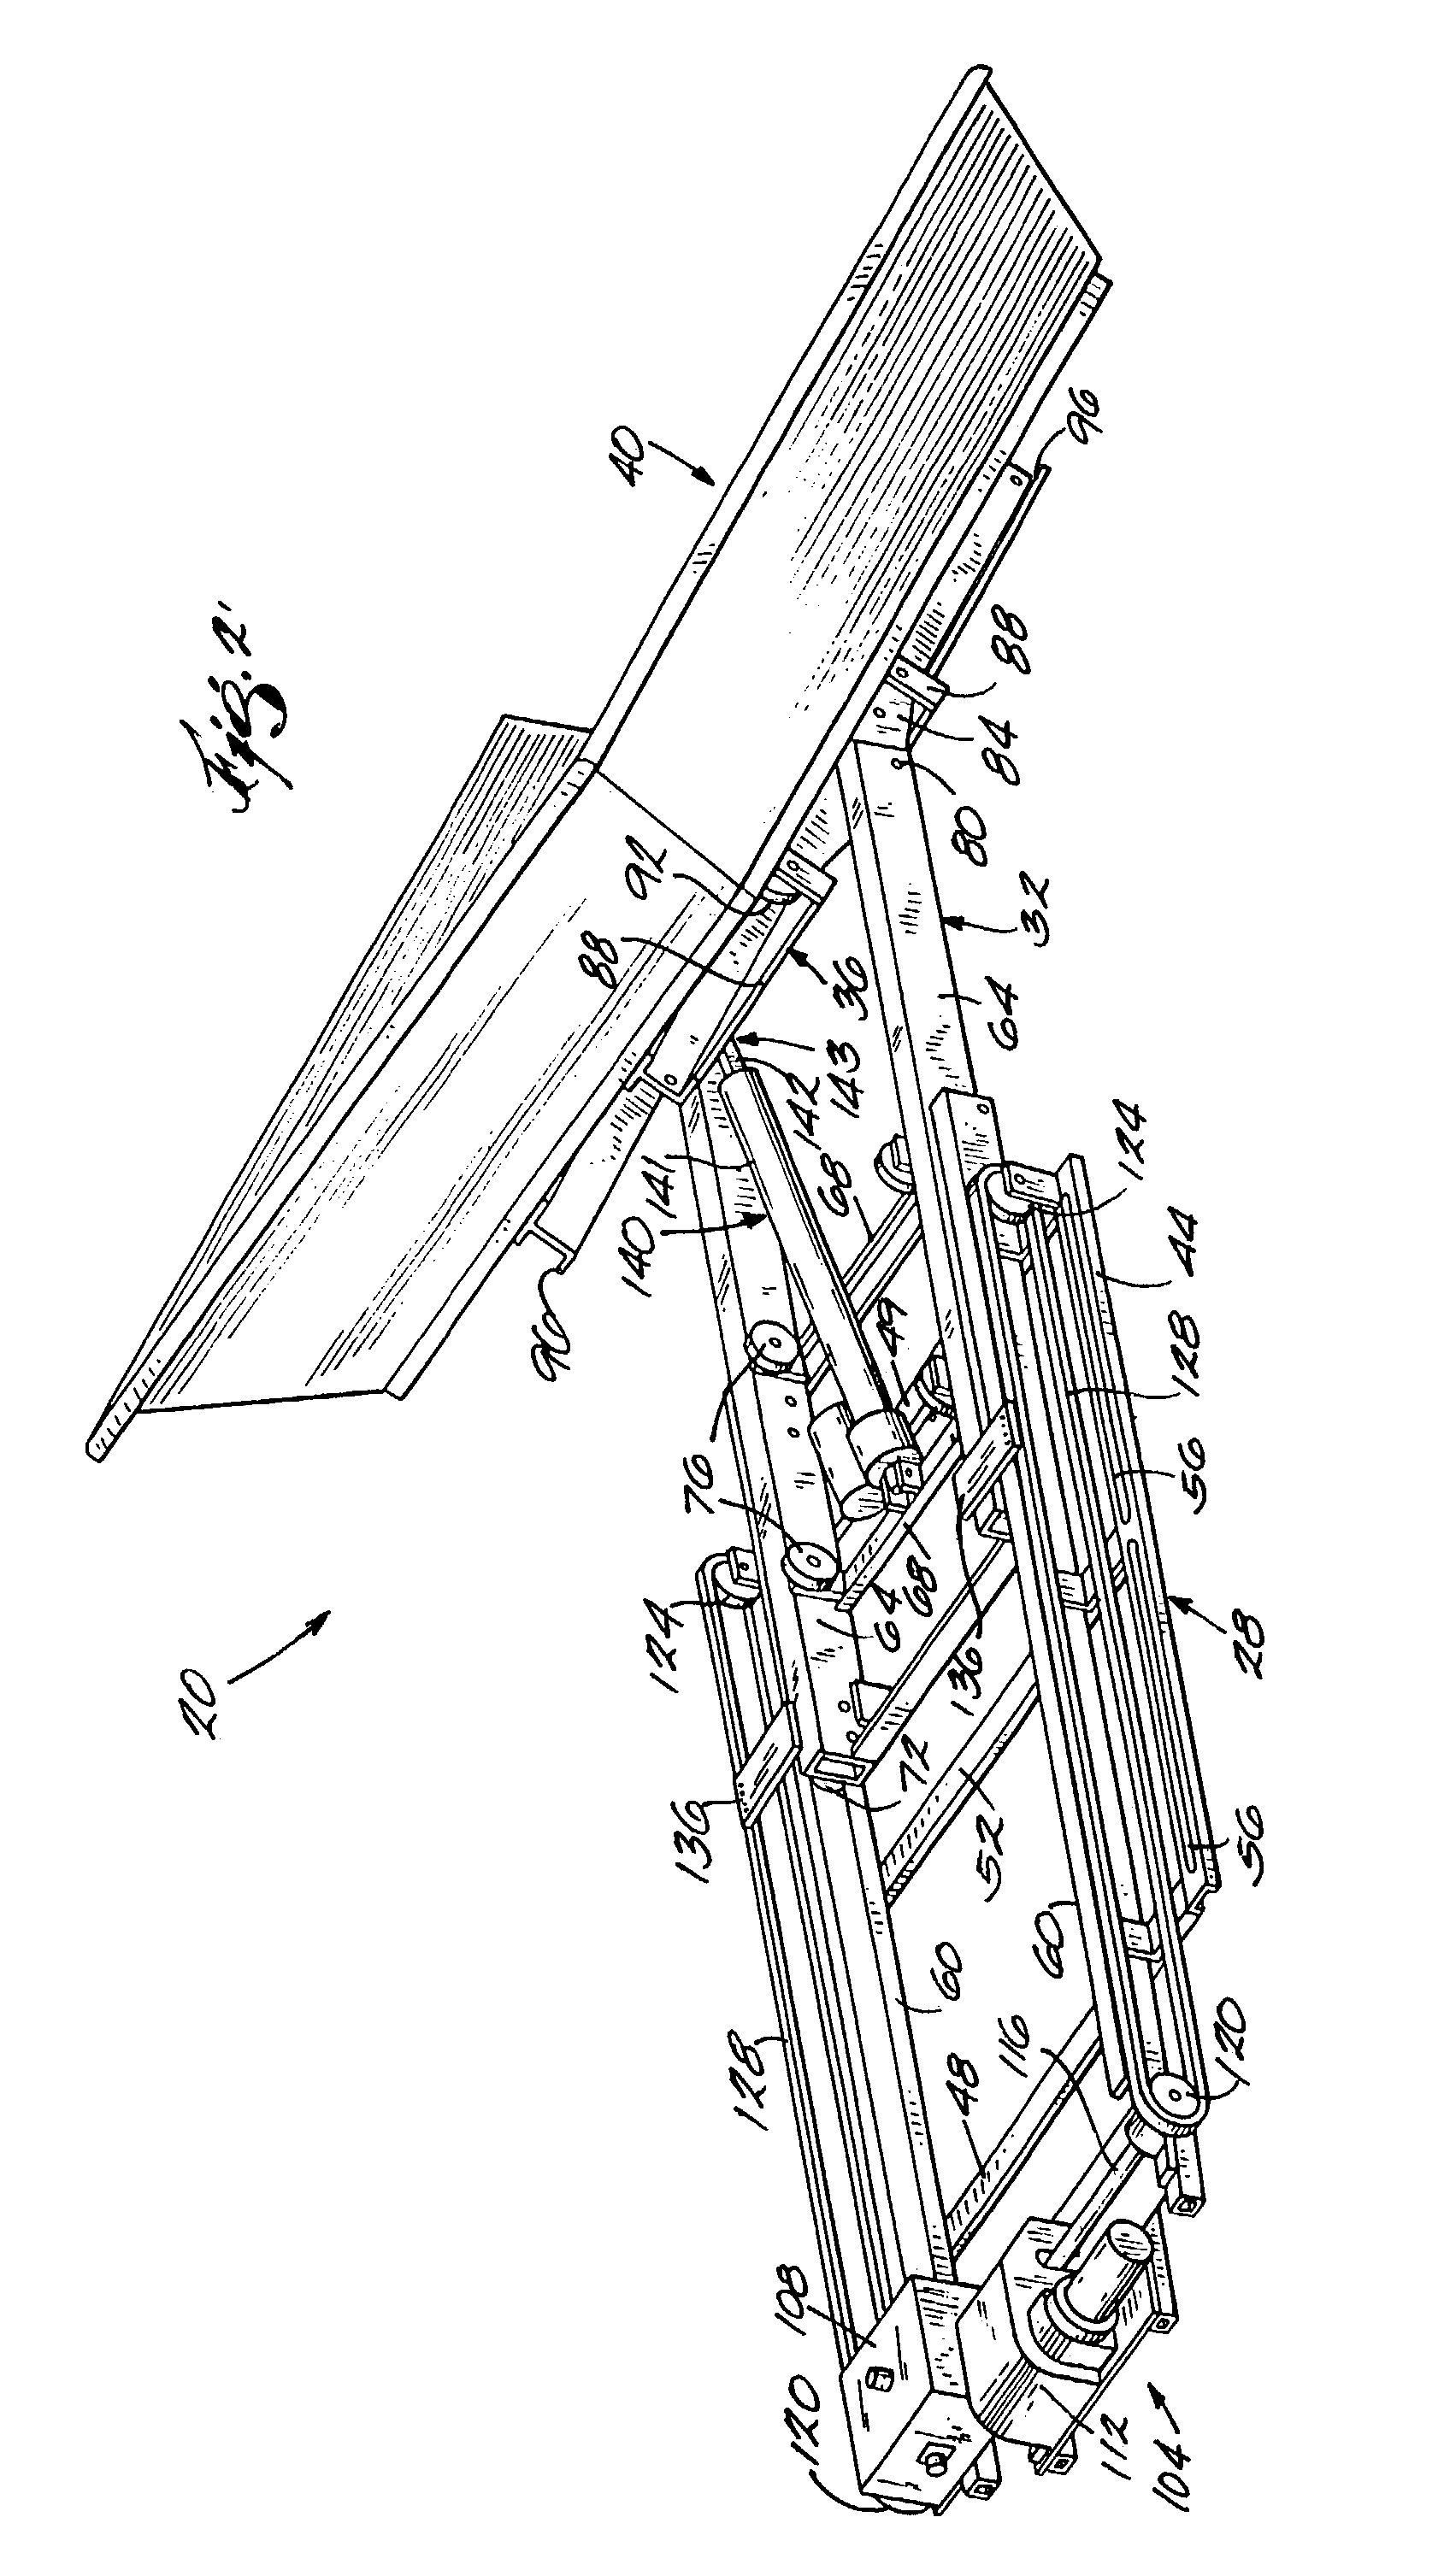 Dumping and transporting accessory having a telescoping lift with a pivot mounted trolley